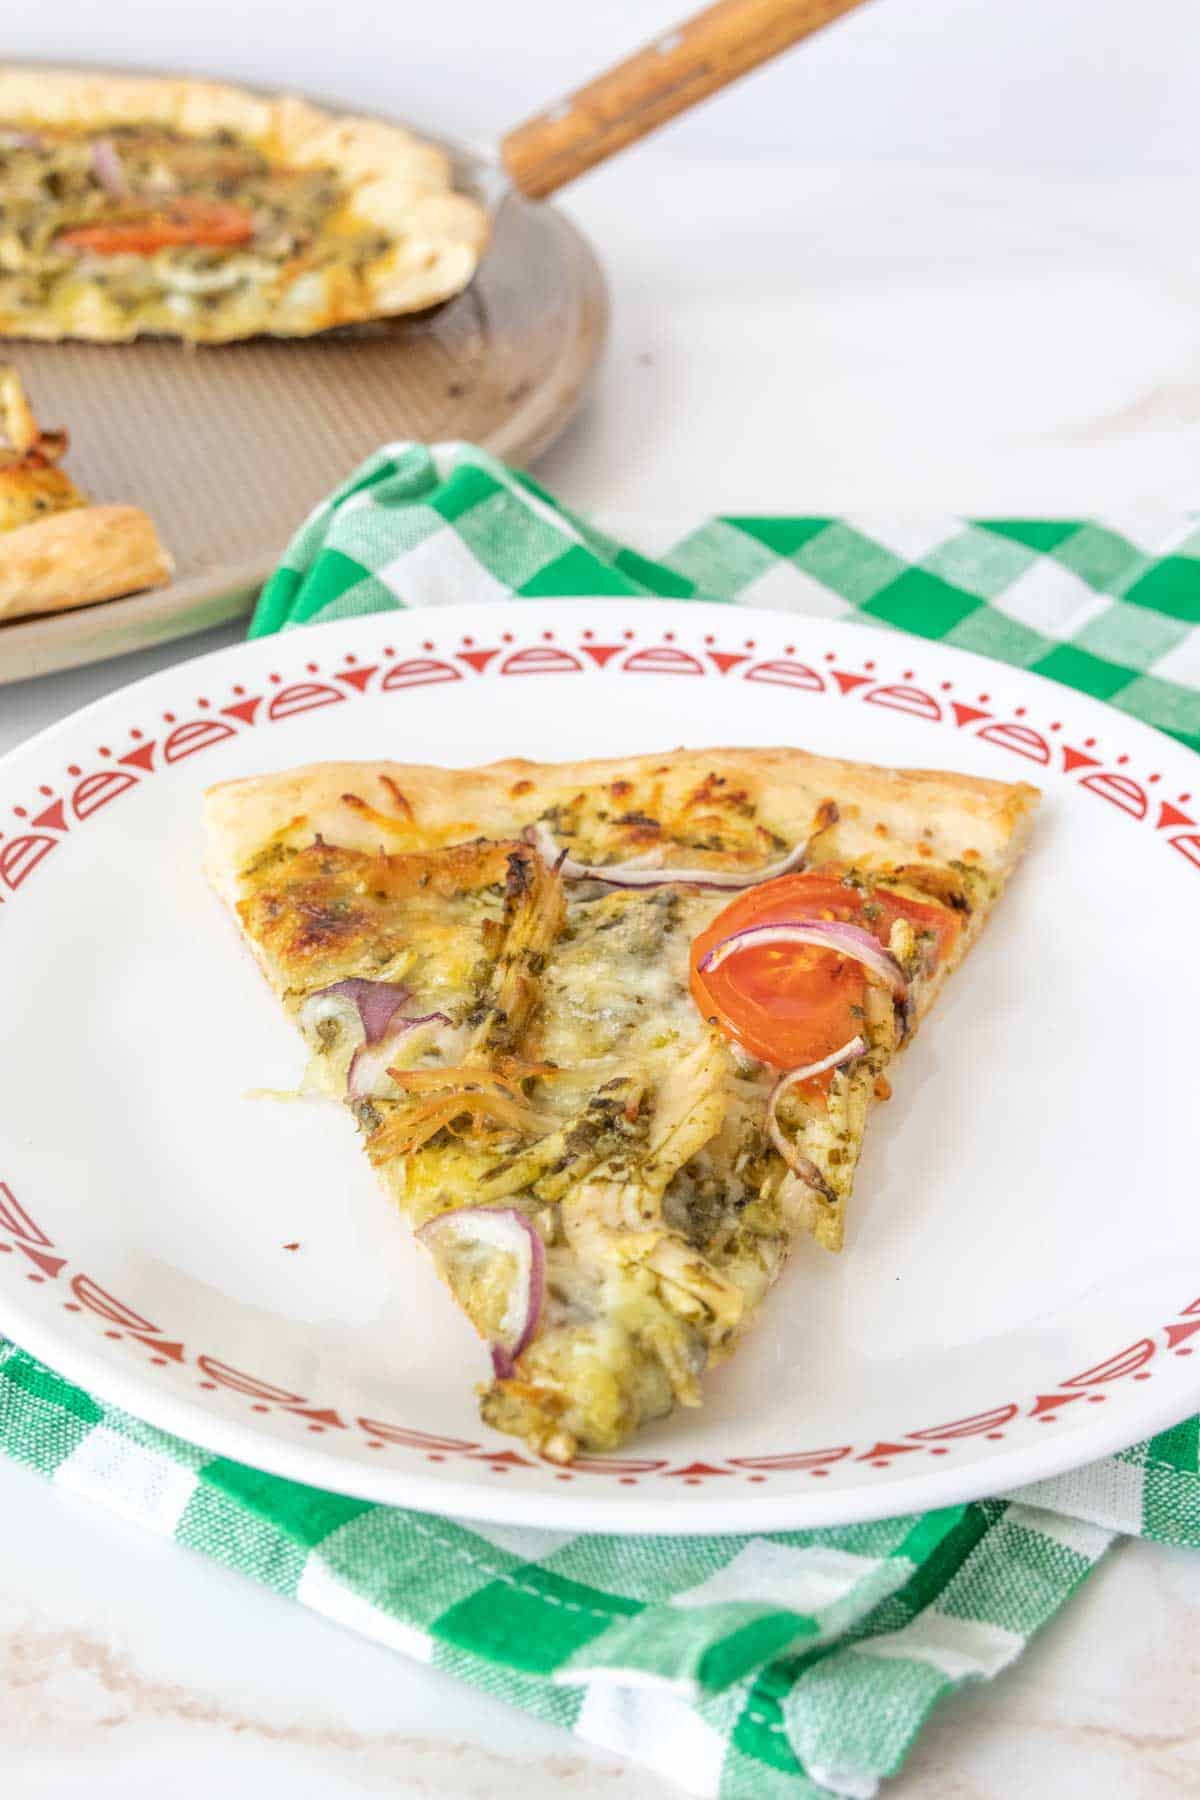 Slice of chicken pesto pizza on a plate with a green plaid napkin underneath.